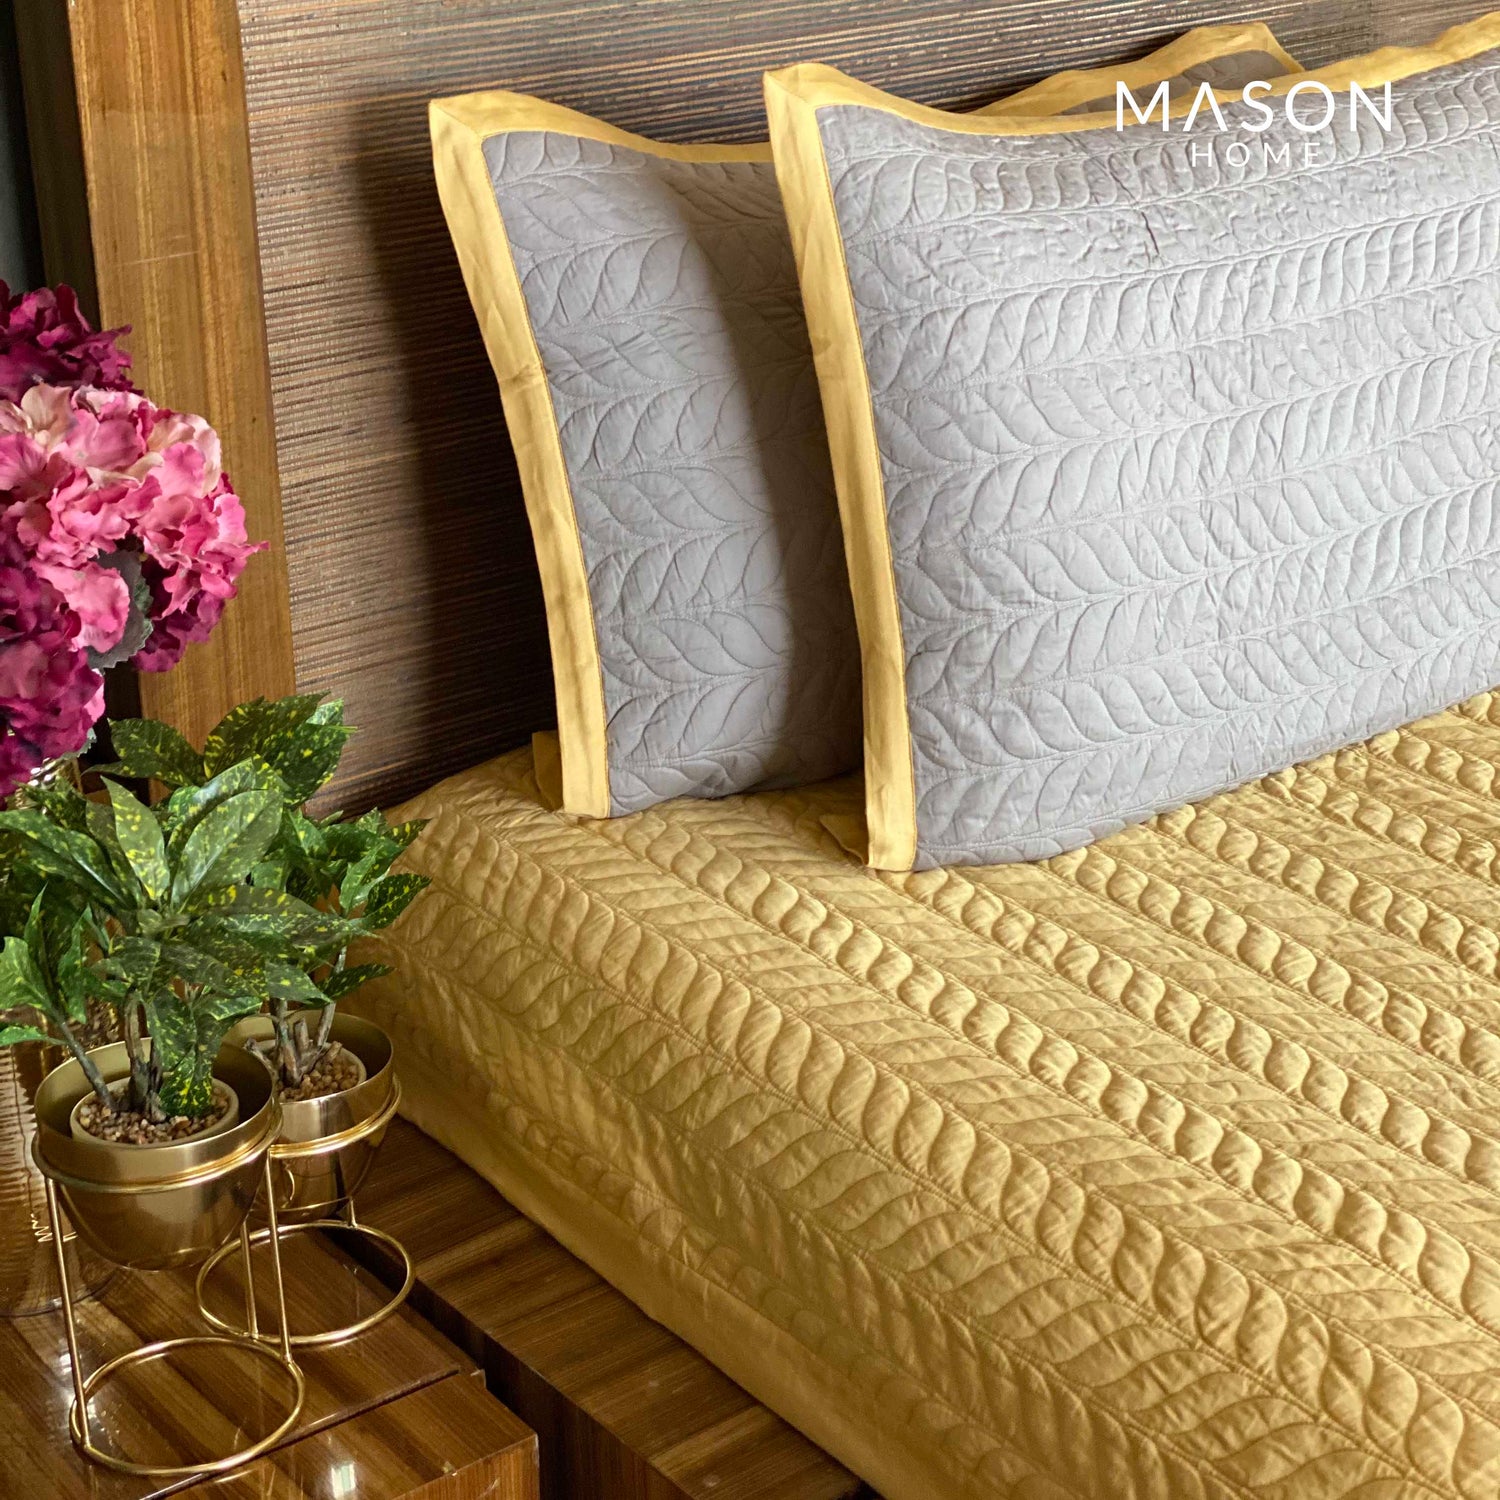 Cotton Bedspread - Butter Cup Yellow And Sandstone Grey (Reversible)